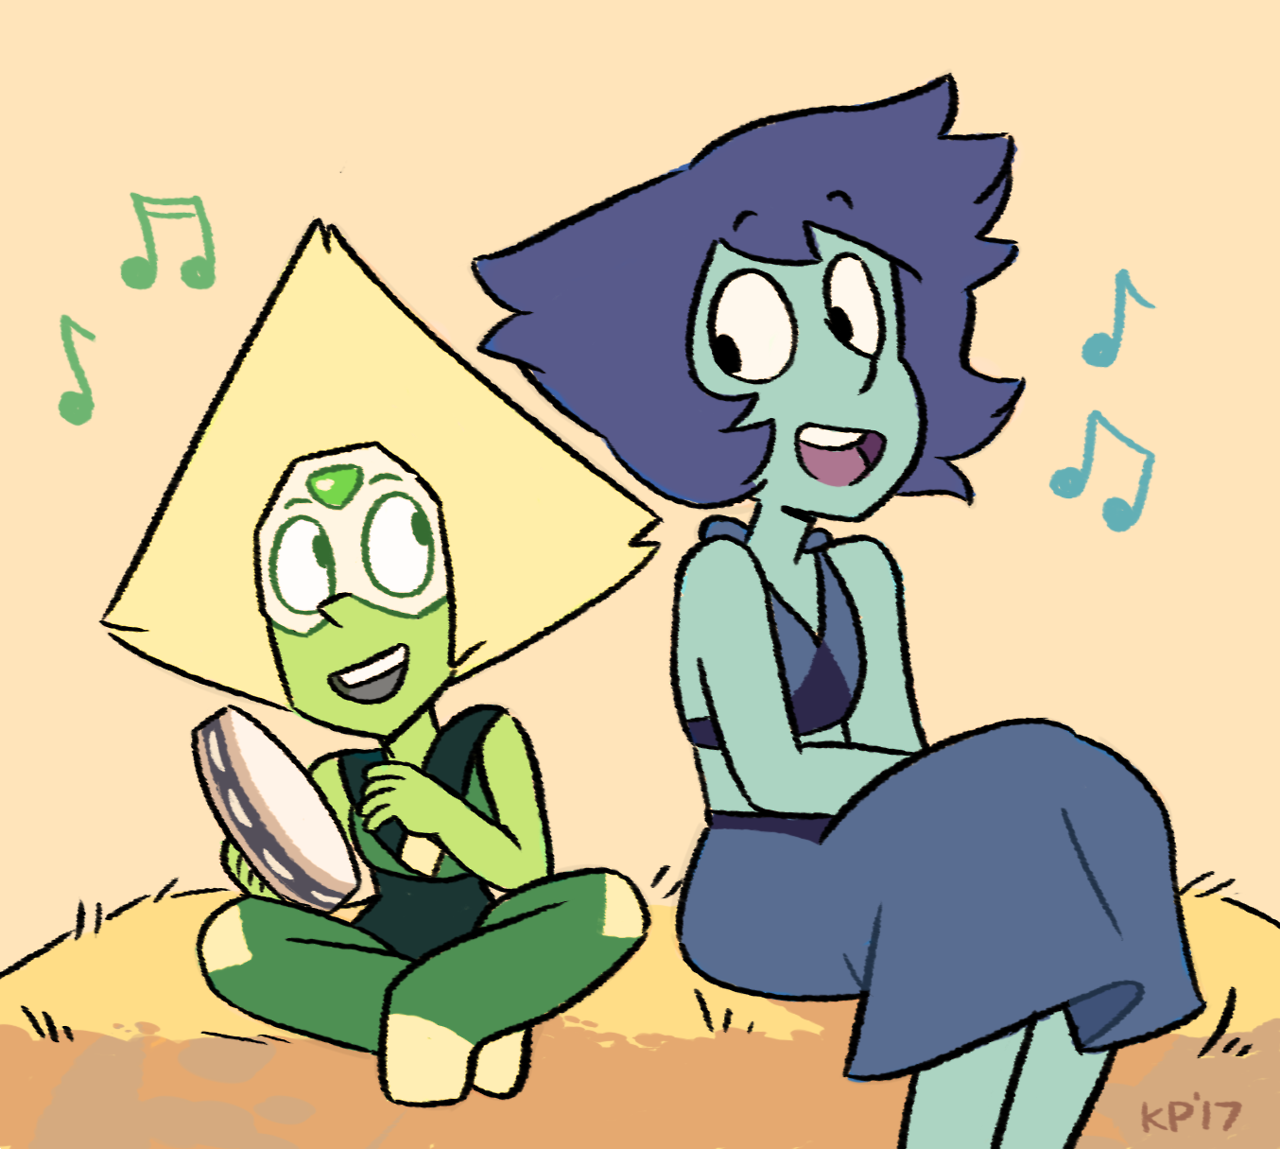 Someday Peridot and Lapis will sing a duet and it will be wonderful. ♪♫